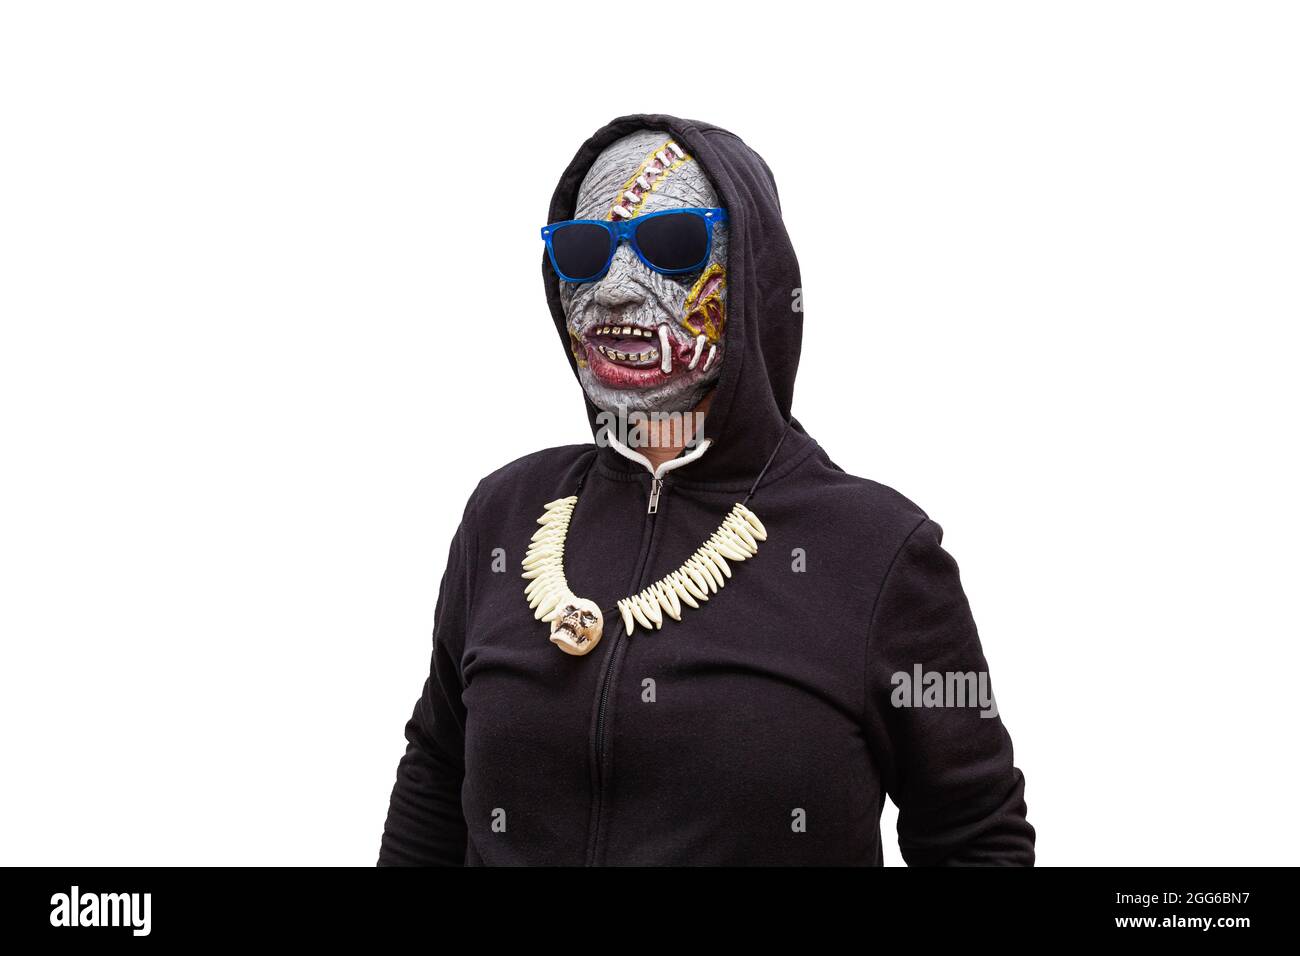 A man disguised in a zombie mask wearing a black hooded sweatshirt is wearing sunglasses with blue frames. Stock Photo